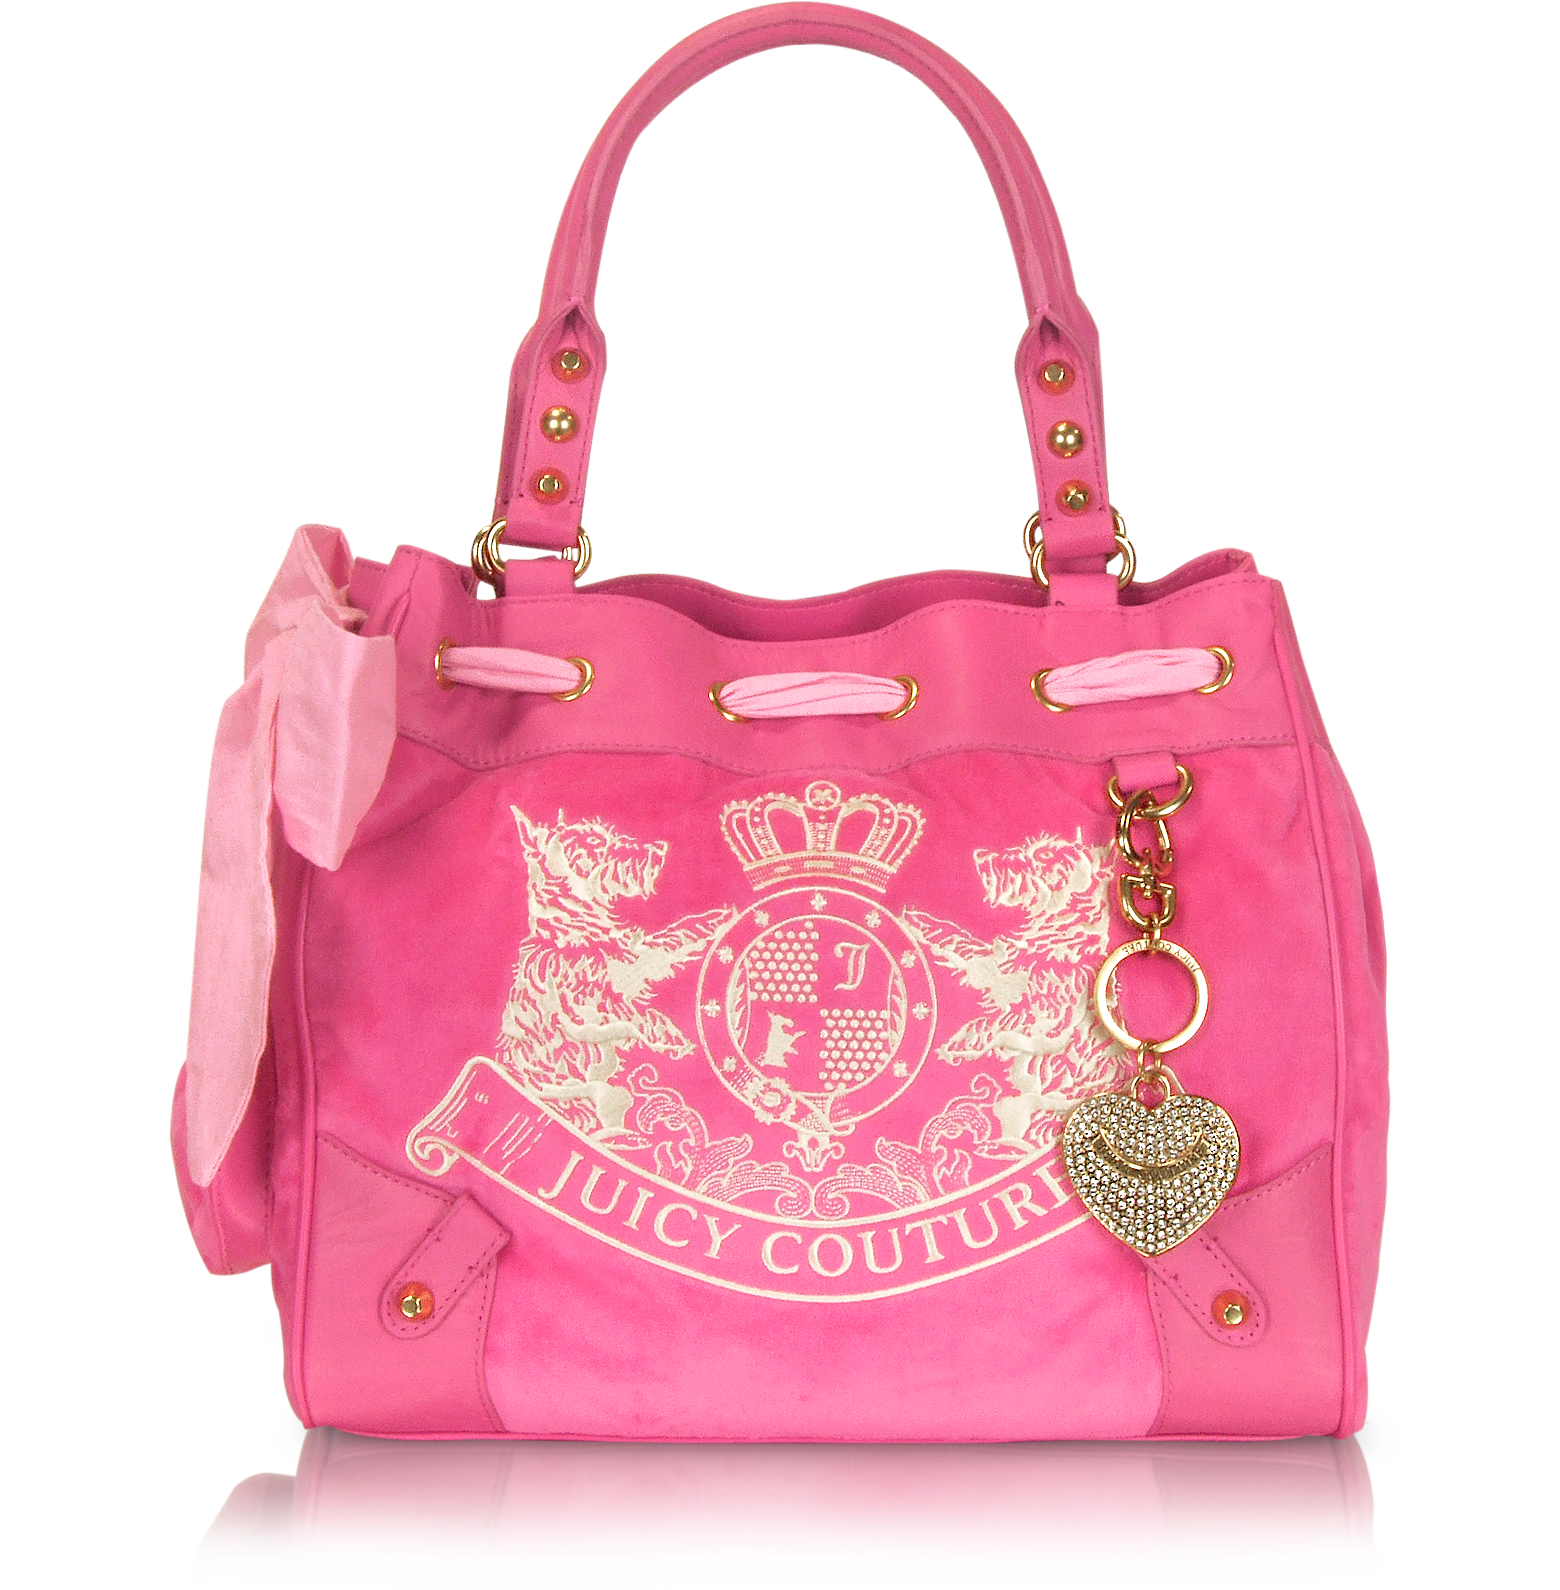 Juicy Couture New Scottie Embroidery Daydreamer Bag at FORZIERI